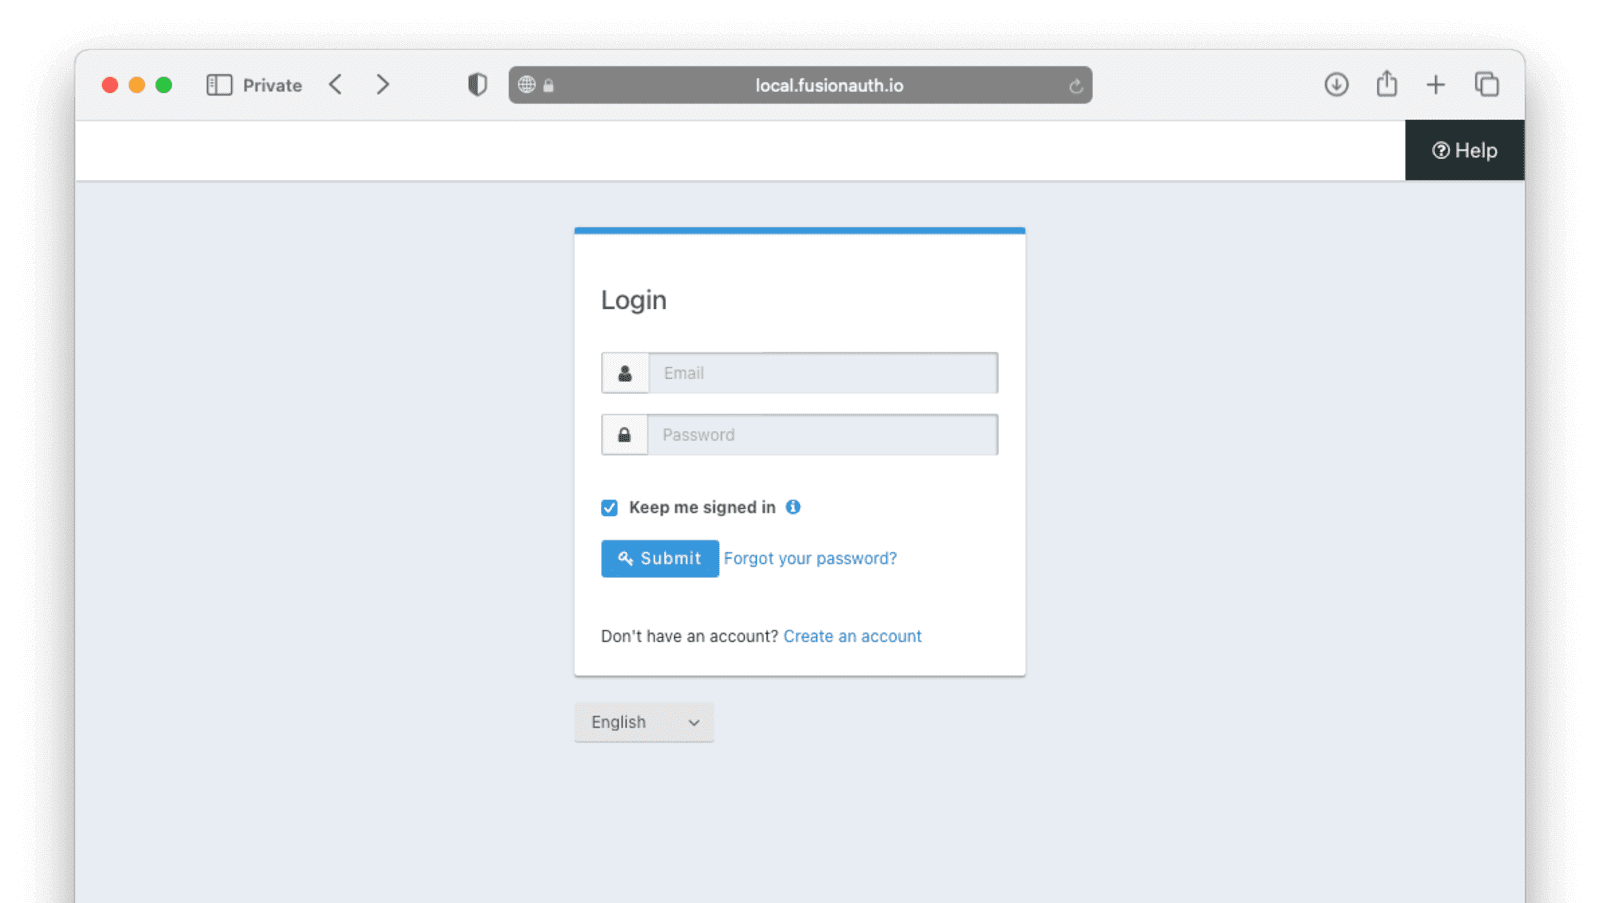 The FusionAuth login page, with registration as an option